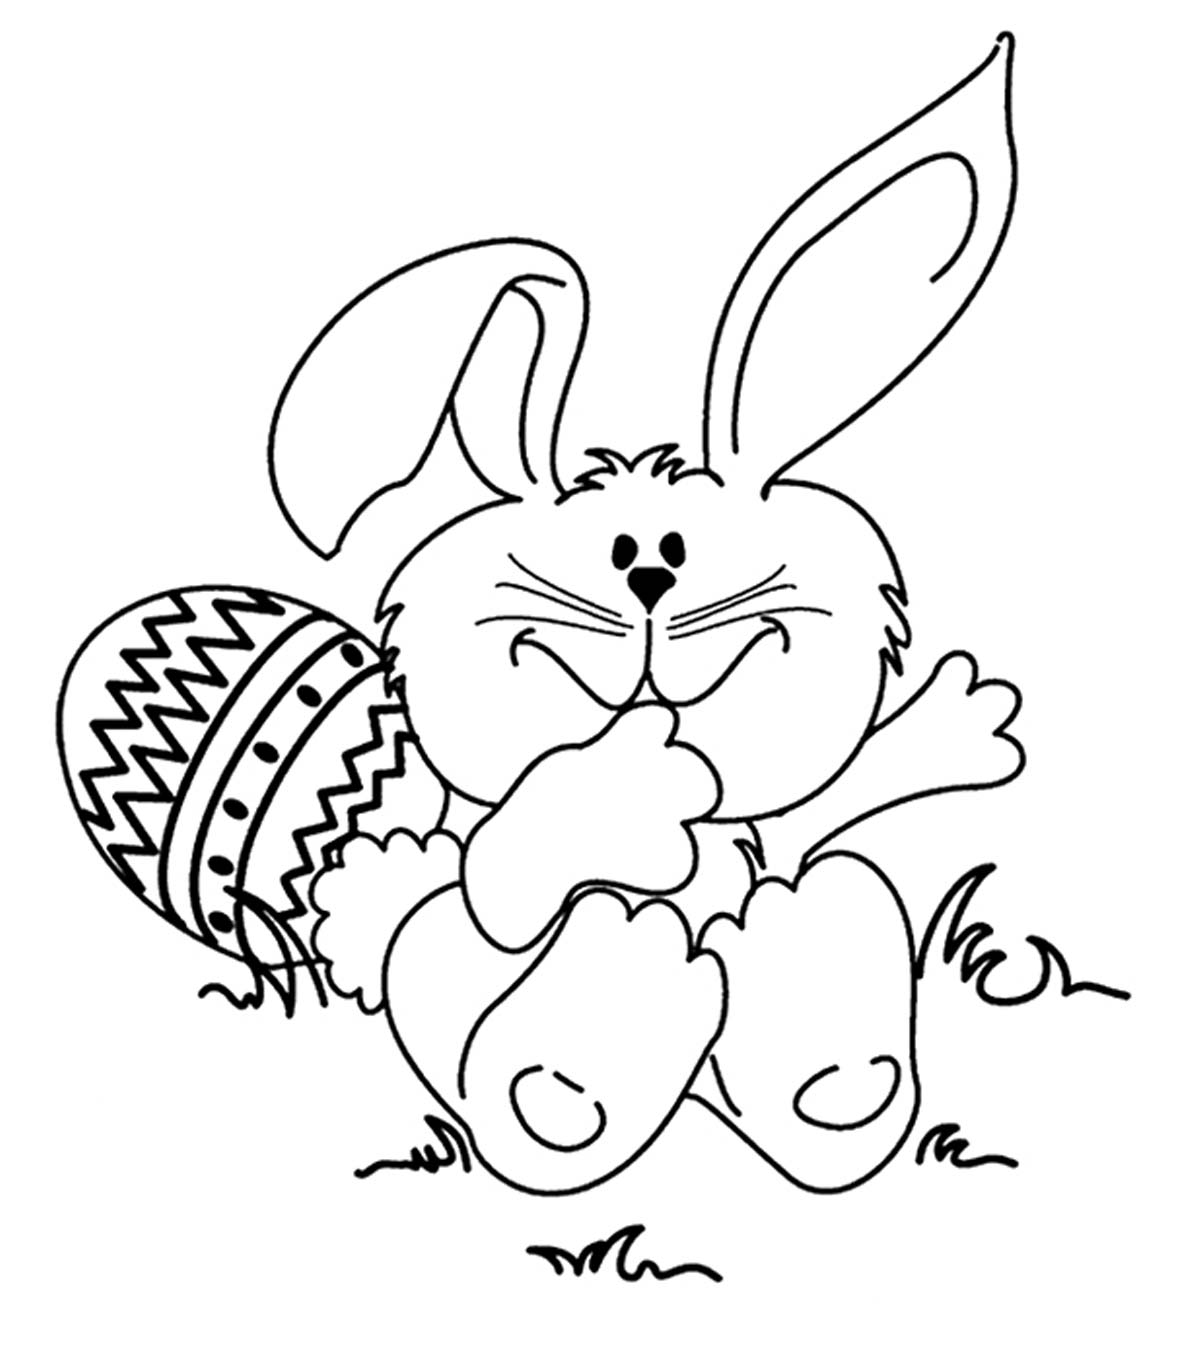 10 Cute & Funny Rabbit Coloring Pages For Your Toddler_image